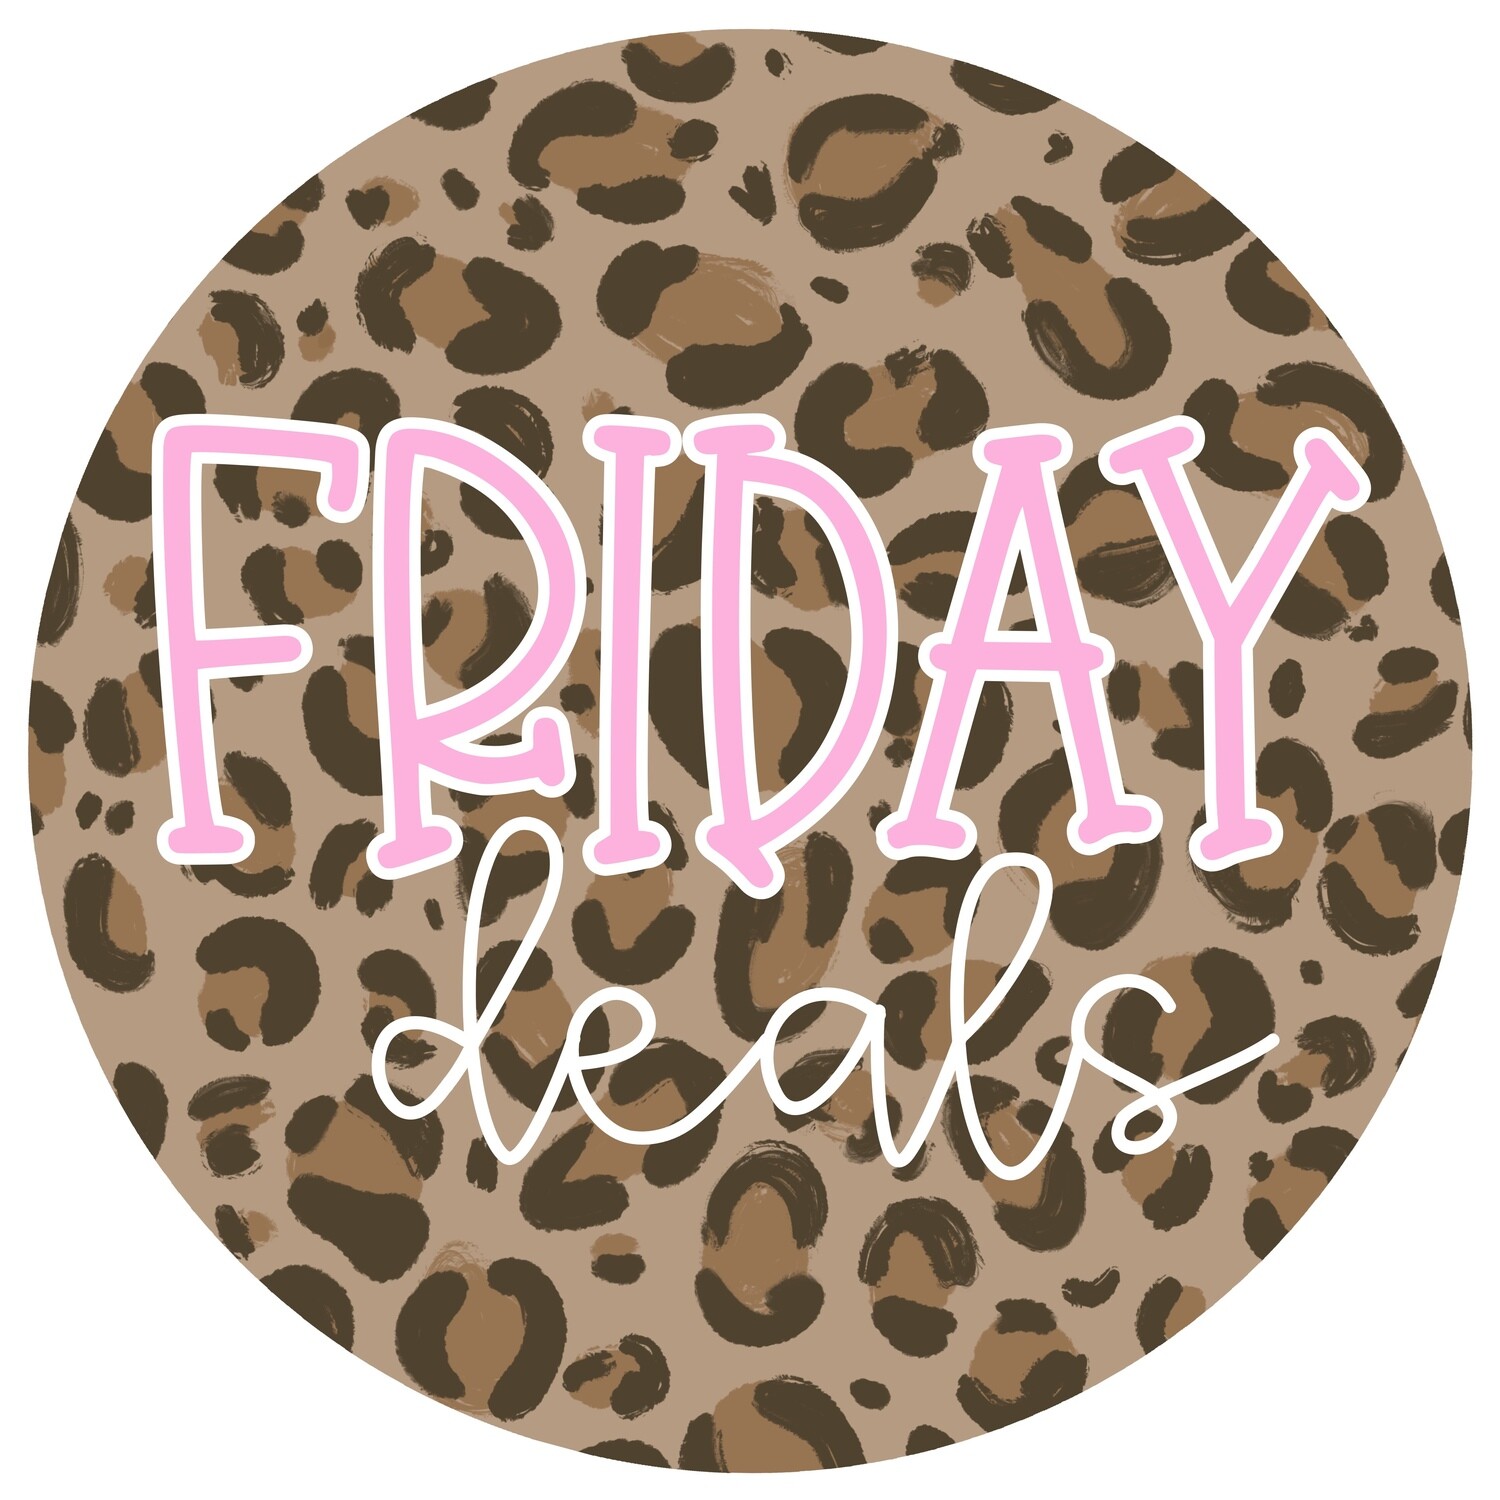 Add All Friday Deals (8 Full Halloween Designs + 1 Seamless Pattern) to Your Cart - 9.23.22